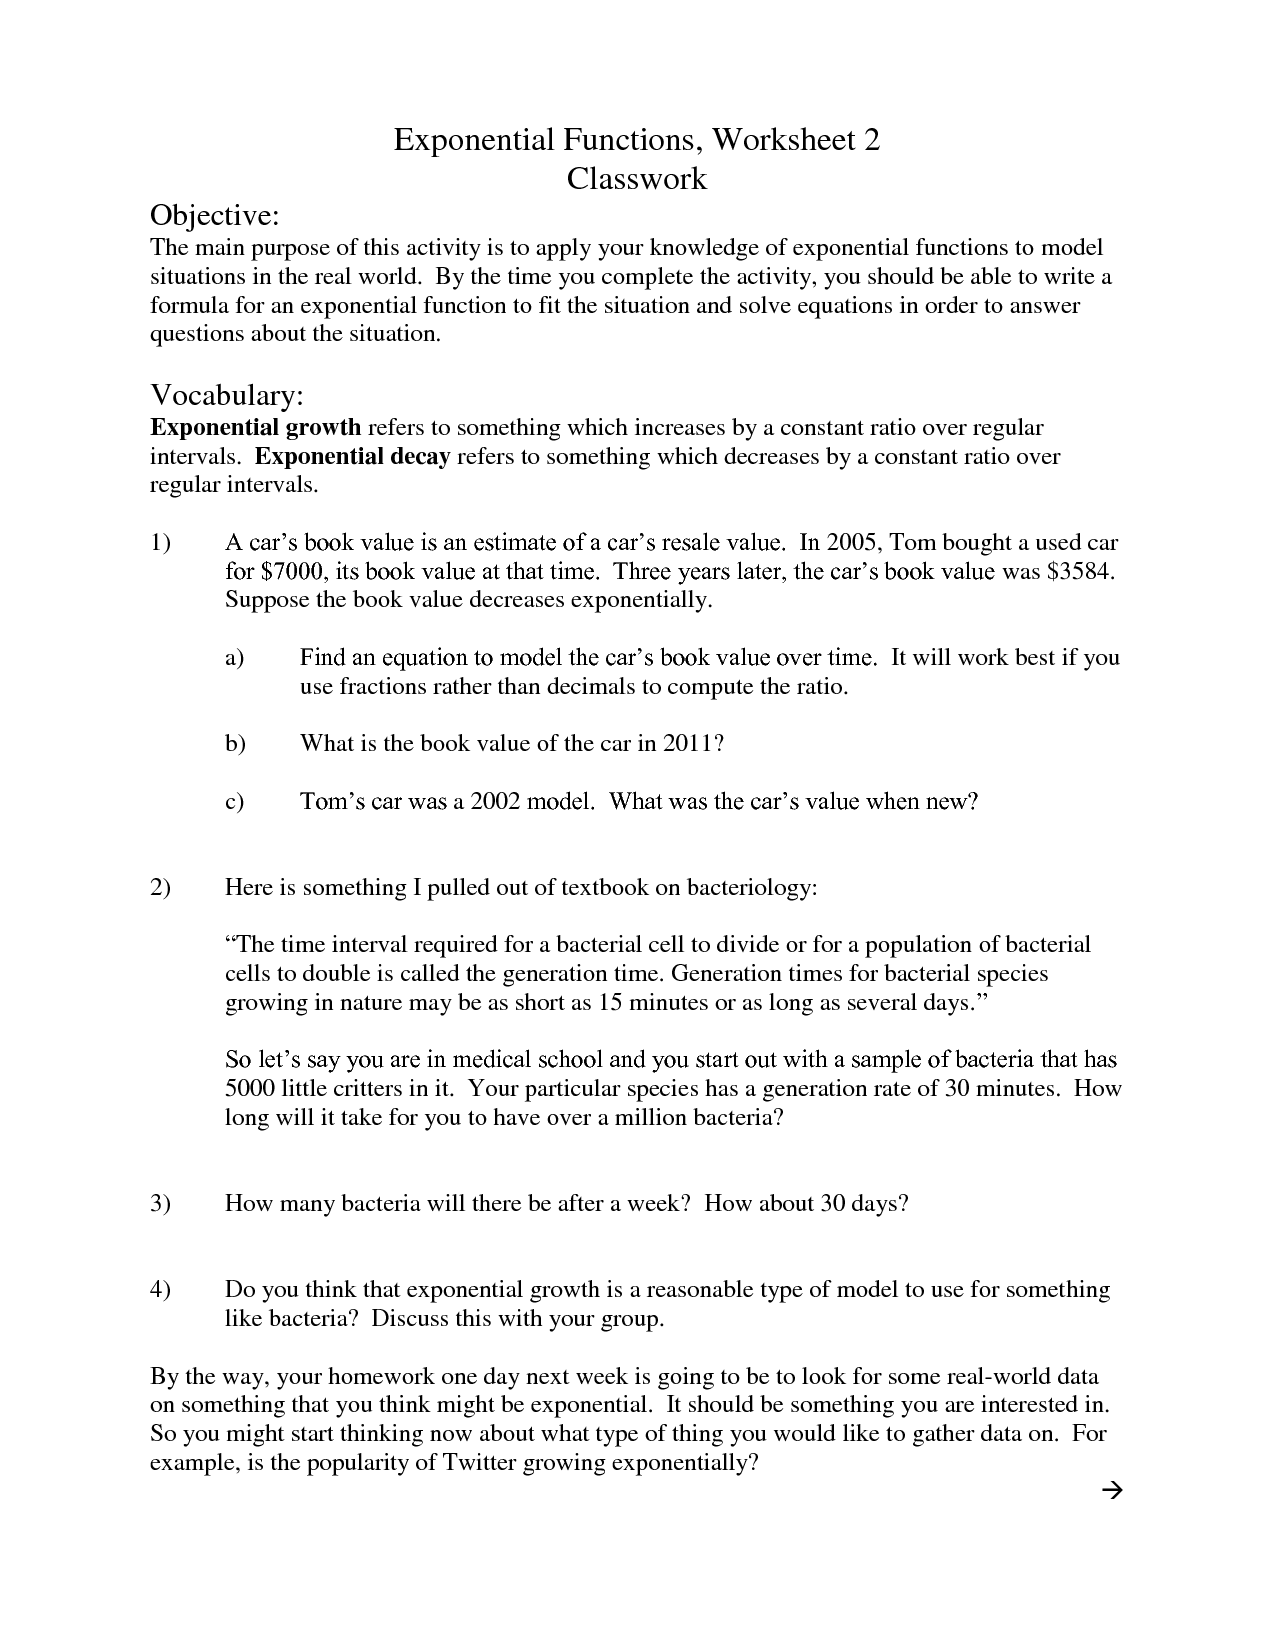 17-best-images-of-linear-function-word-problems-worksheet-algebra-equations-word-problems